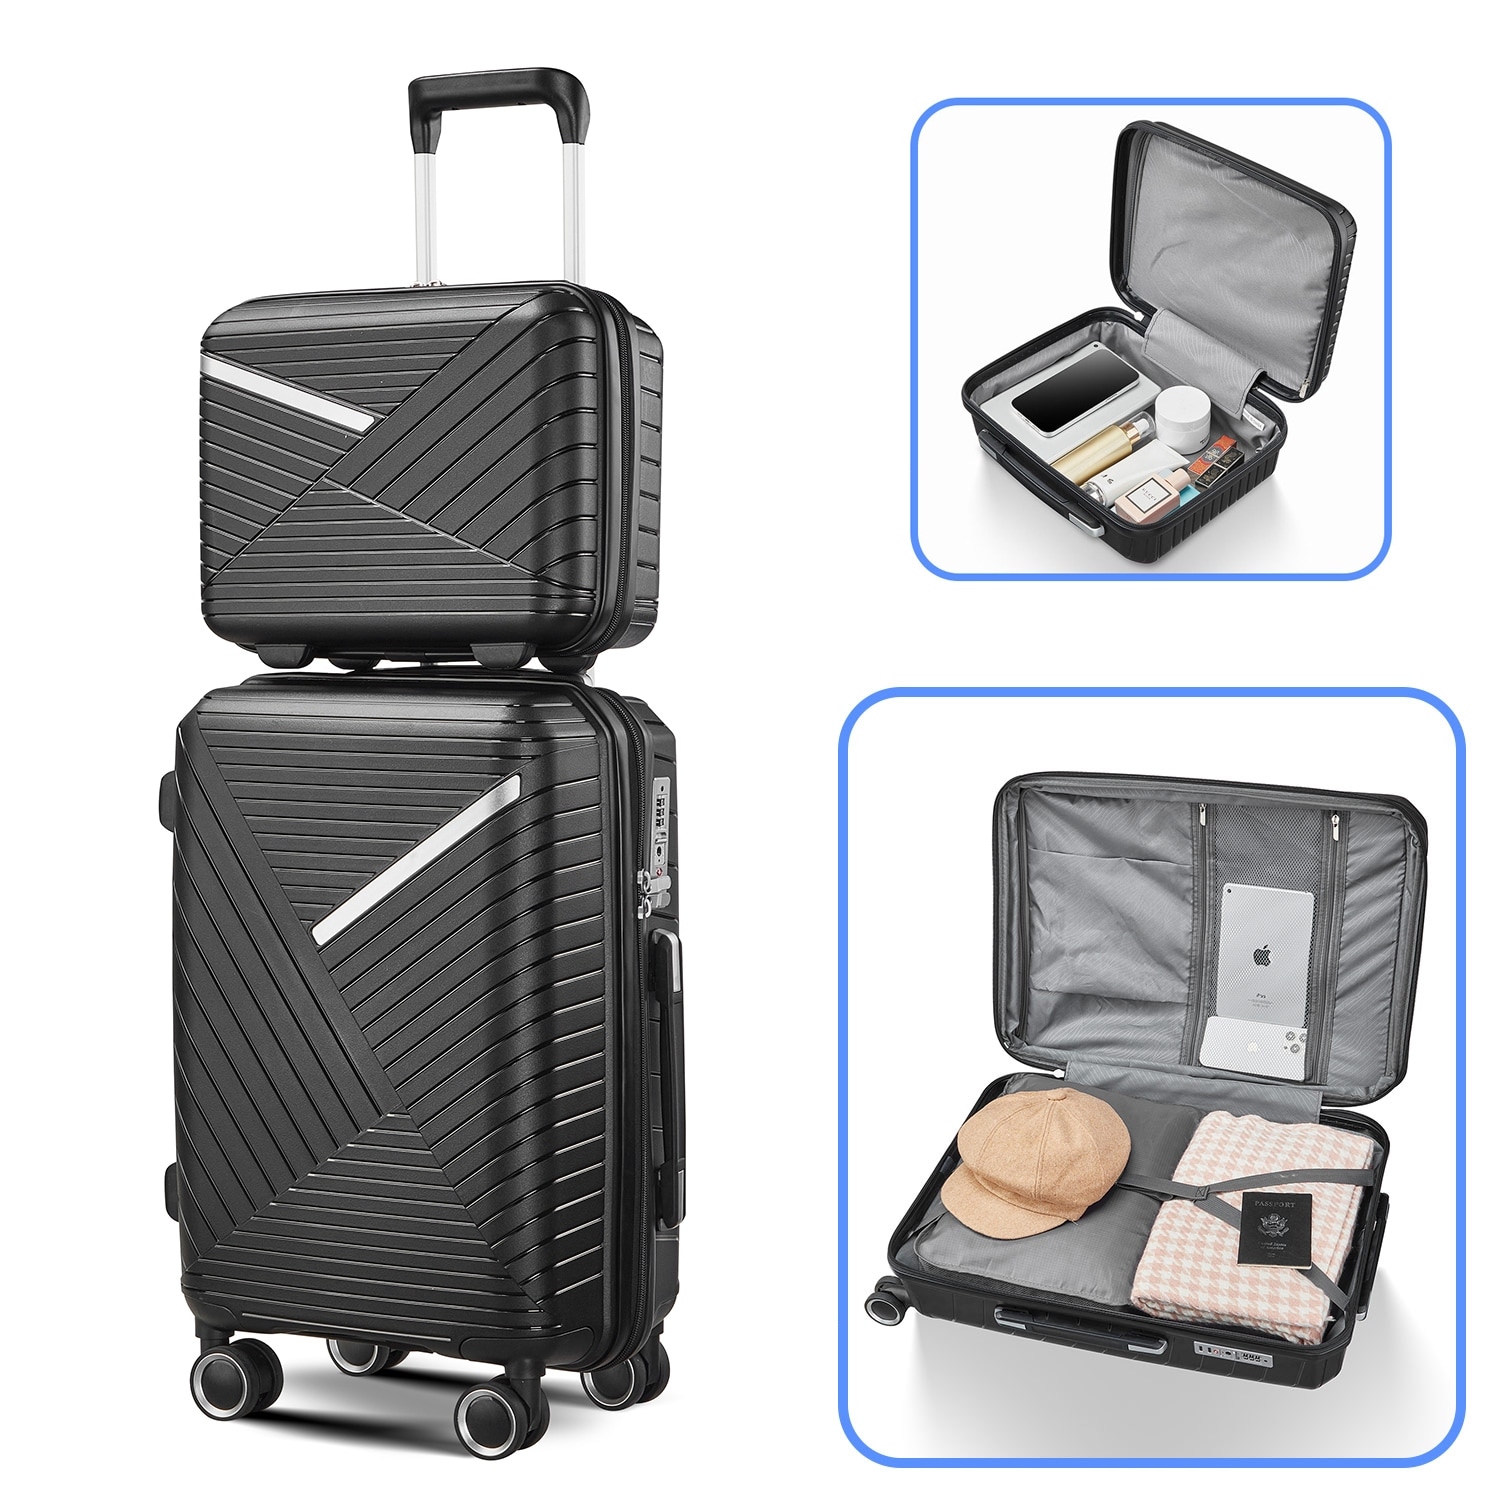 Luggage Sets 4 Piece(14/20/24/28), Expandable Lightweight Suitcase with 4 Wheels PP Materials Durable TSA Lock Travel Luggage